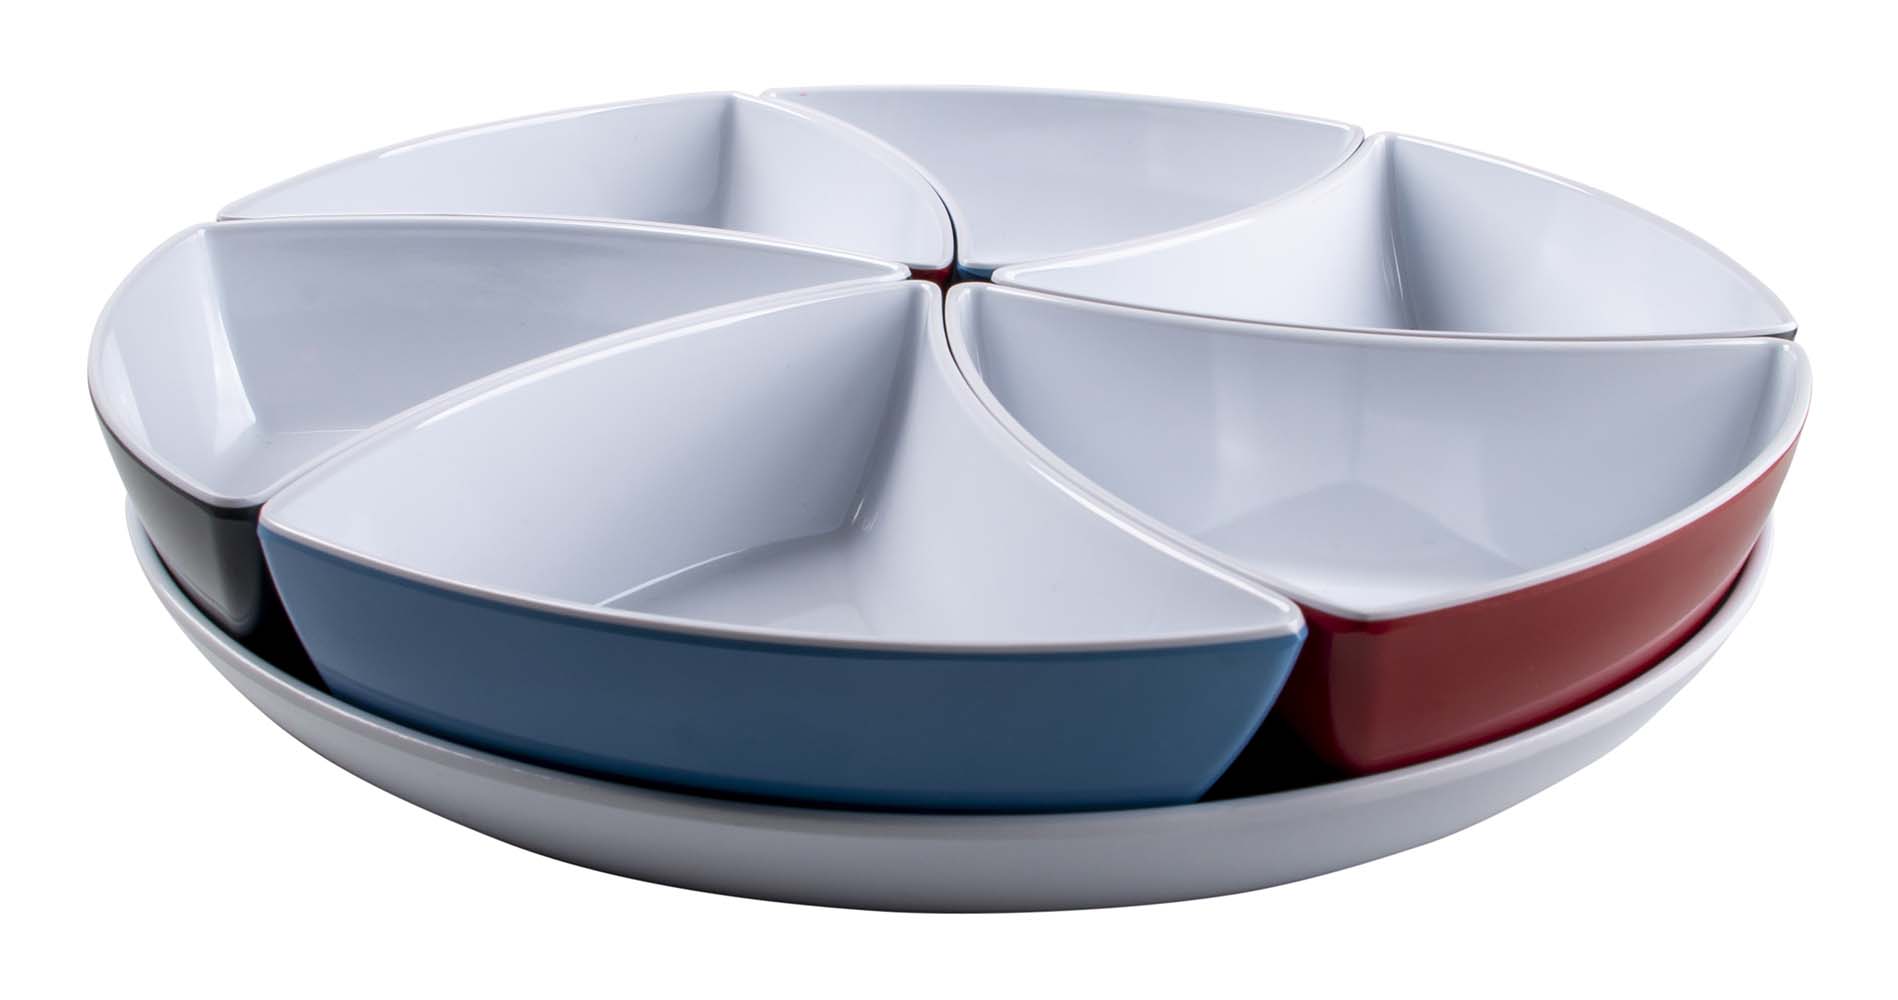 6181413 A handy 7-piece melamine snack set to present snacks in a stylish way. By removing the bowls you can also use them as a serving tray. The snack set is virtually unbreakable and very lightweight. Scratch resistant, dishwasher safe and food approved.